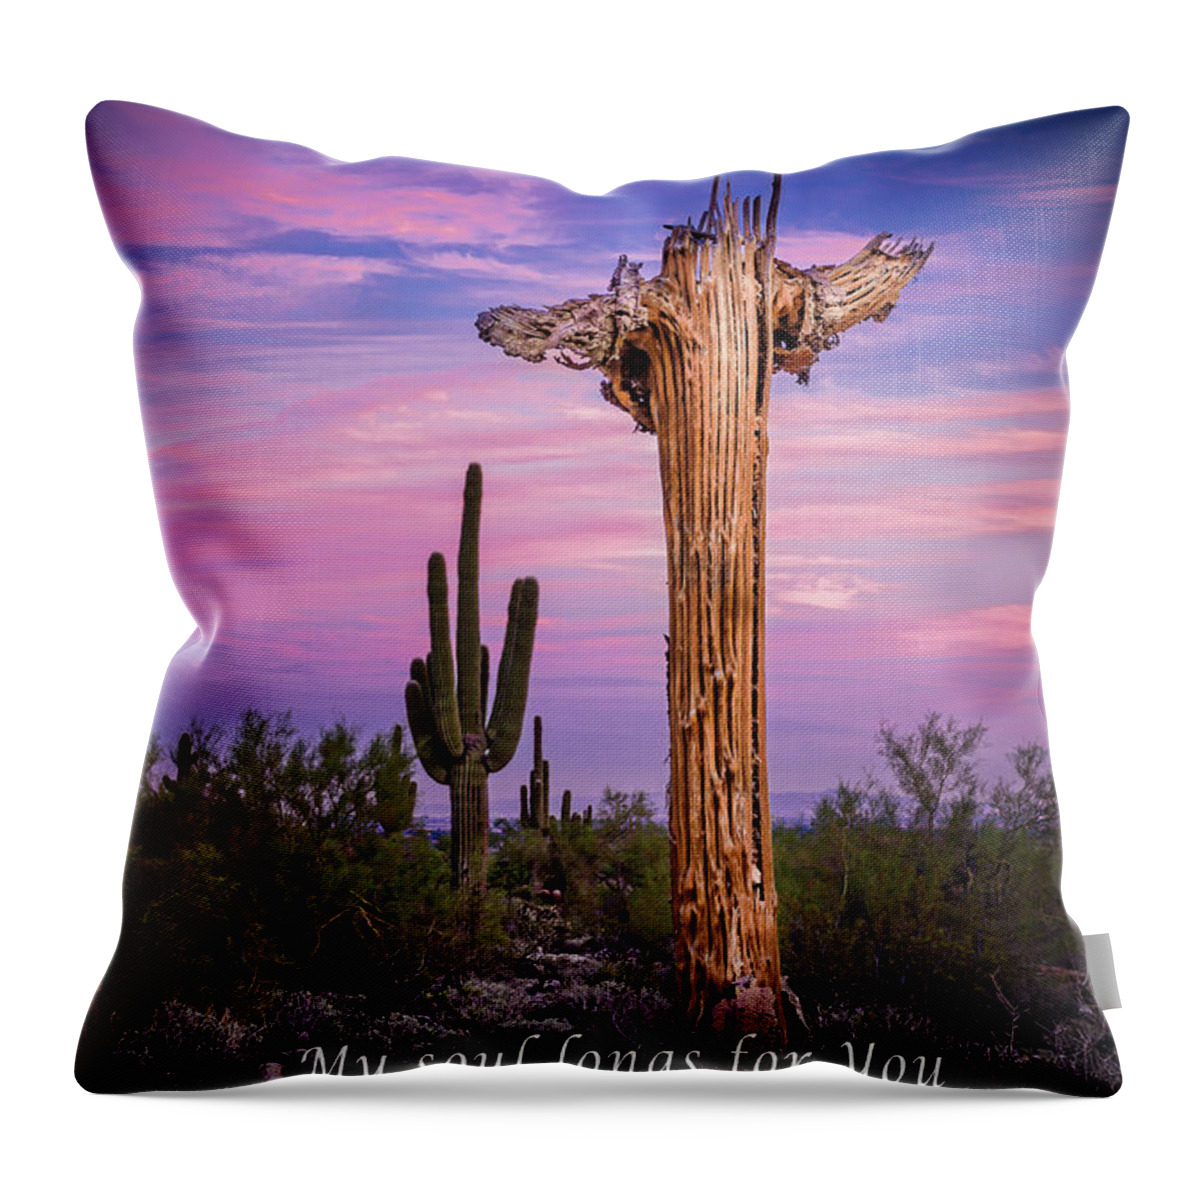 Inspiration Throw Pillow featuring the photograph My Soul Longs For You IN004 by Kenneth Johnson